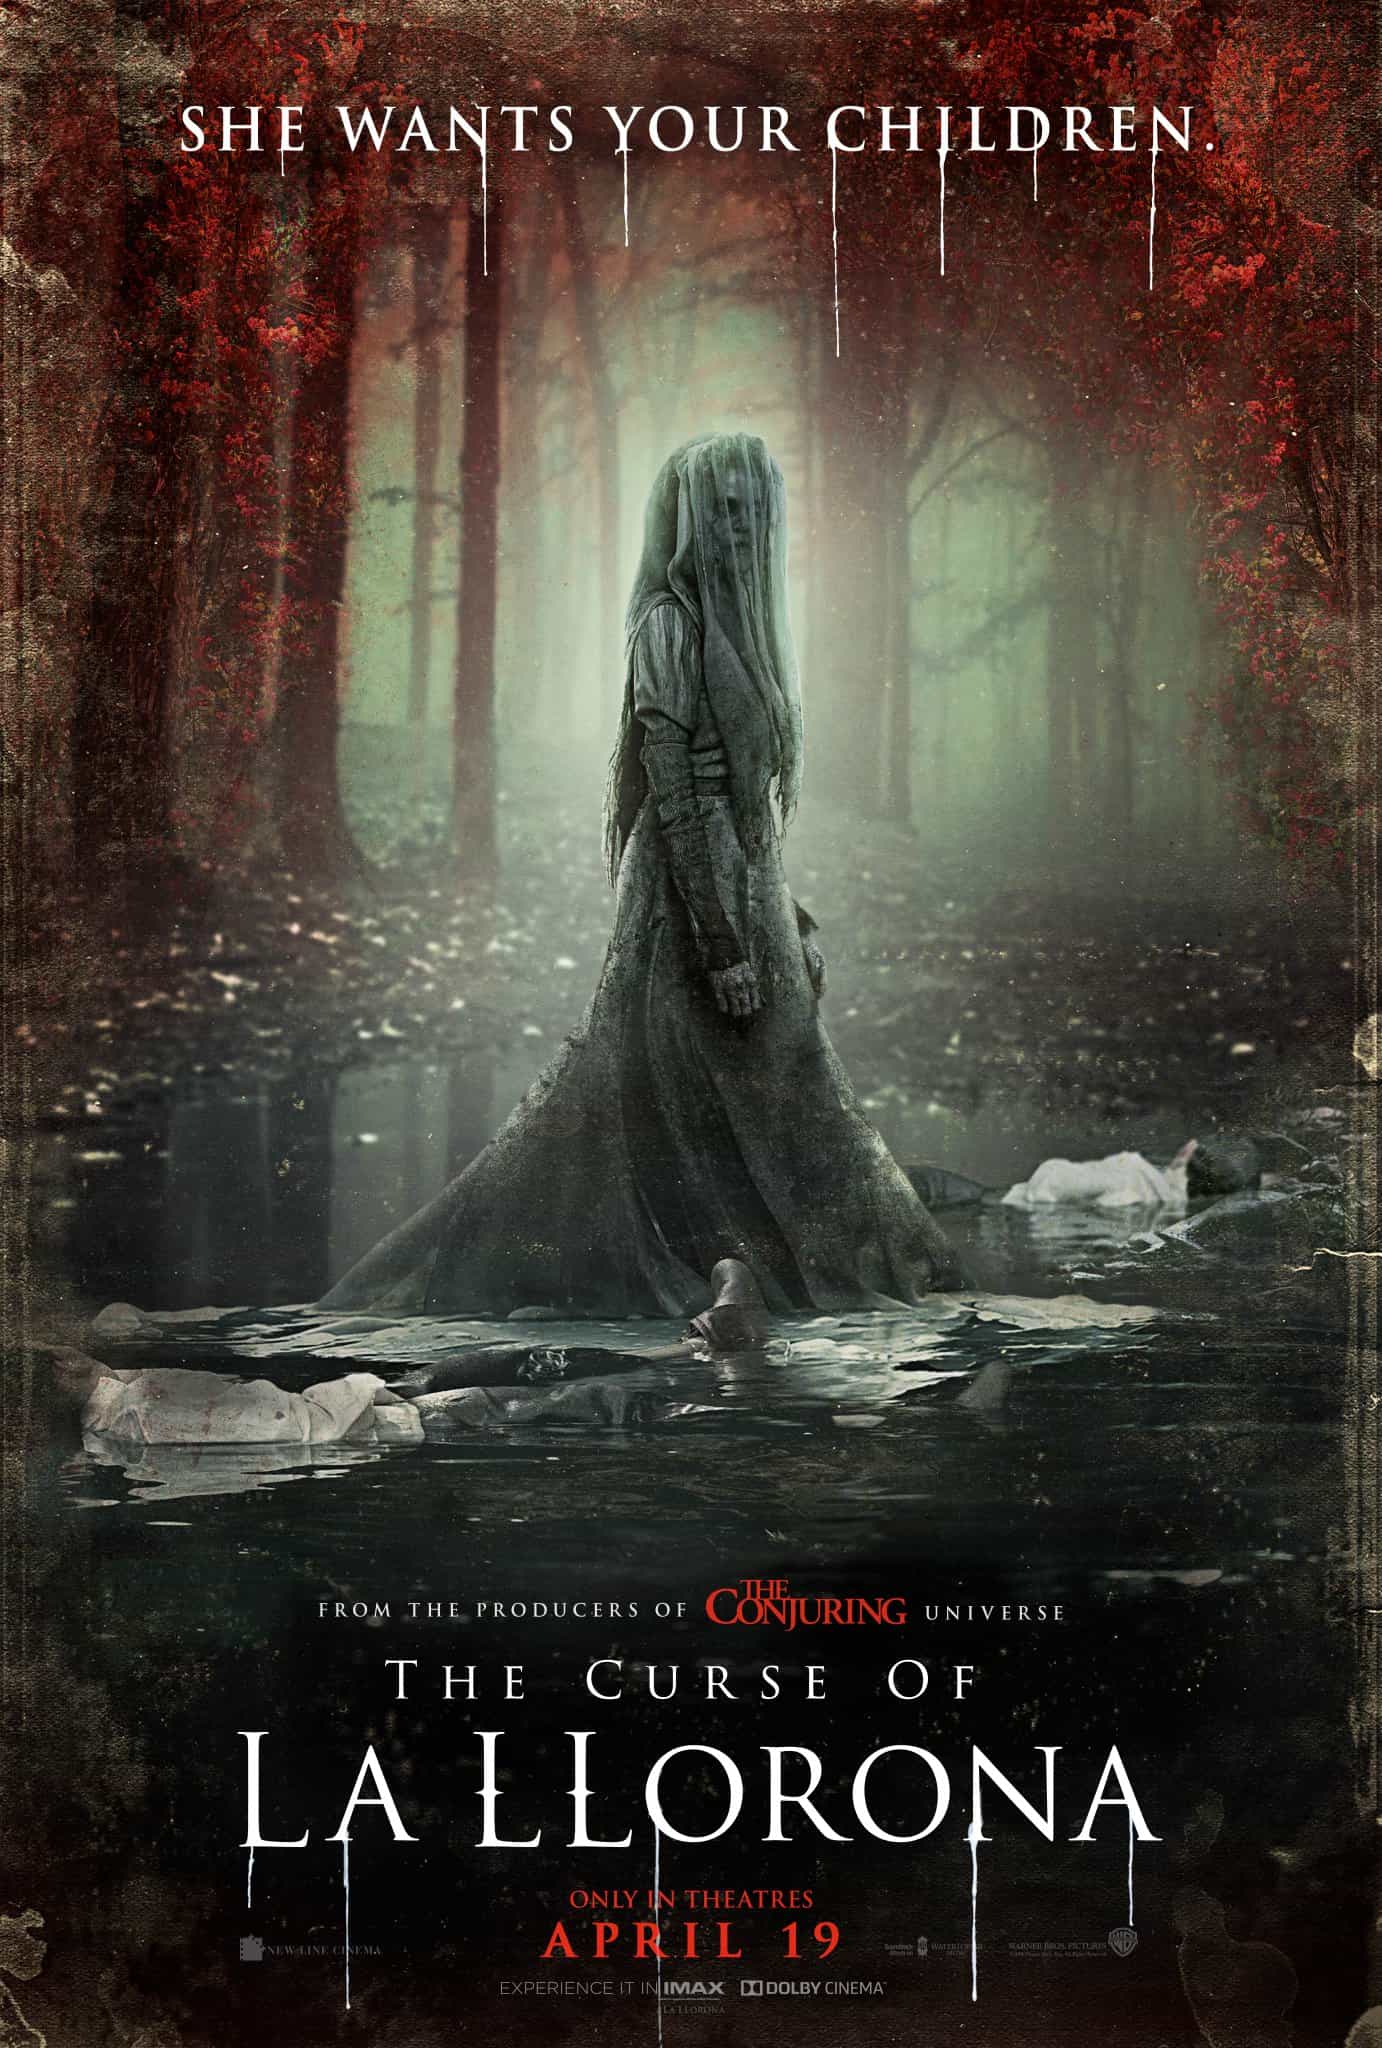 New film releases at the UK box office Friday, 3rd May 2019 - The Curse Of La Llorona, Hotel Mumbai, Extremely Wicked, Shockingly Evil, And Vile, Long Shot, Tolkien and A Dogs Journey